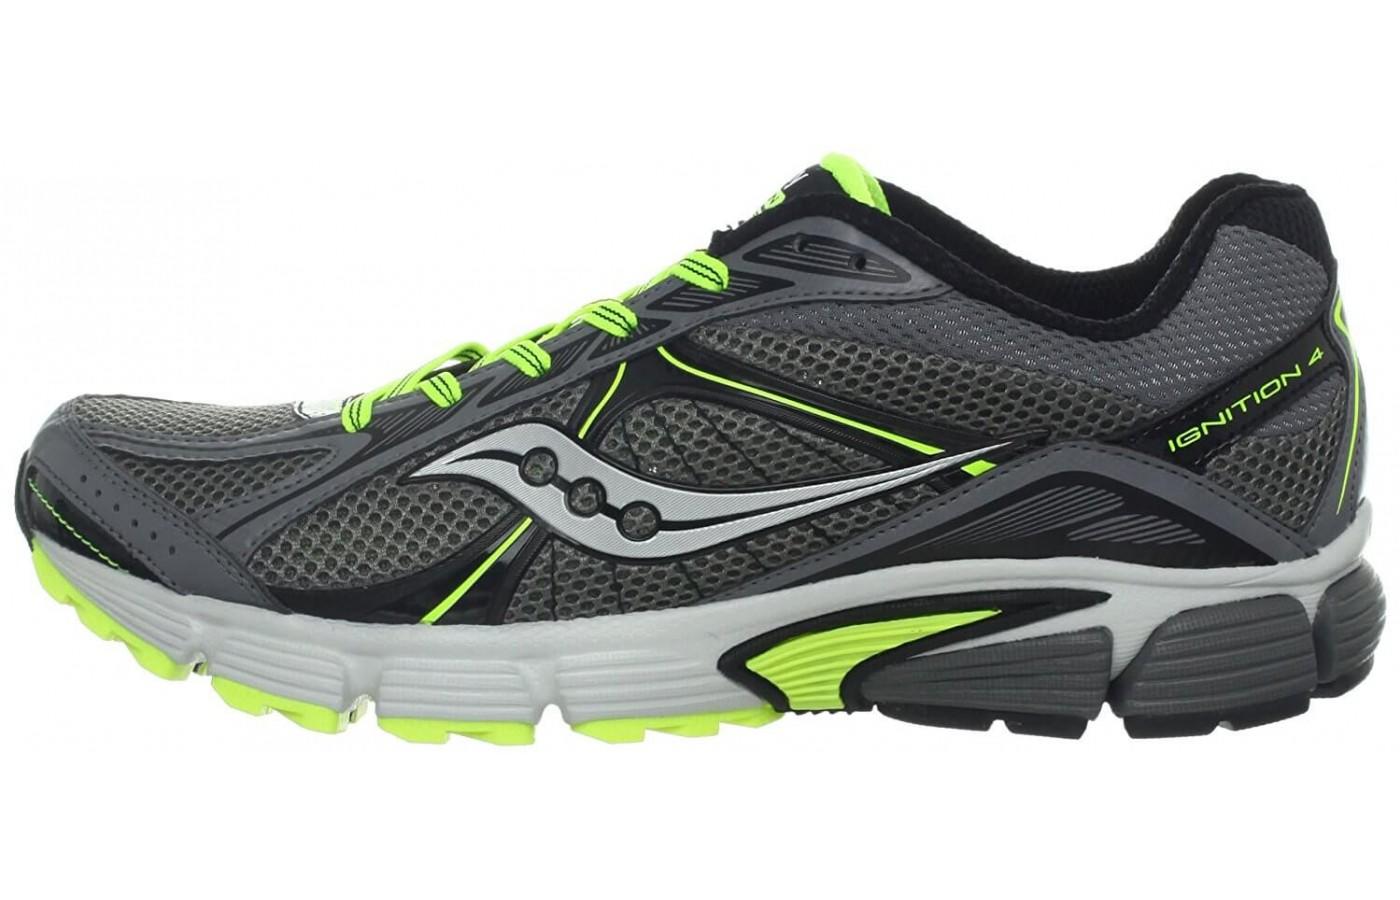 Saucony Ignition 4 had a durable rubber outsole that provides strong traction